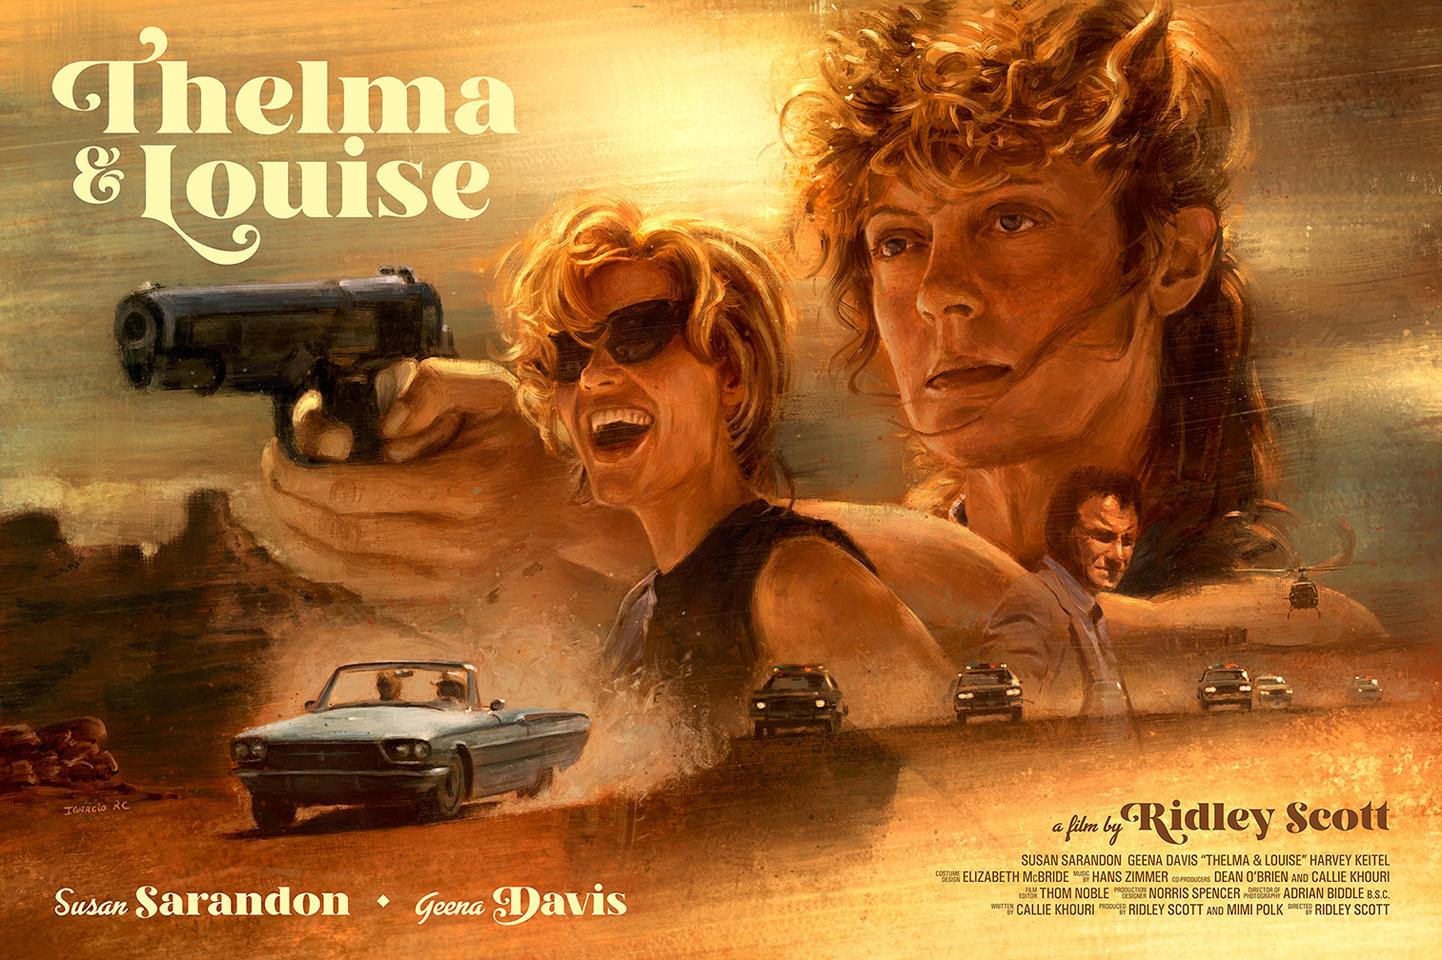 Movie Poster Thelma And Louise Desert Ridley Scott 1442x960